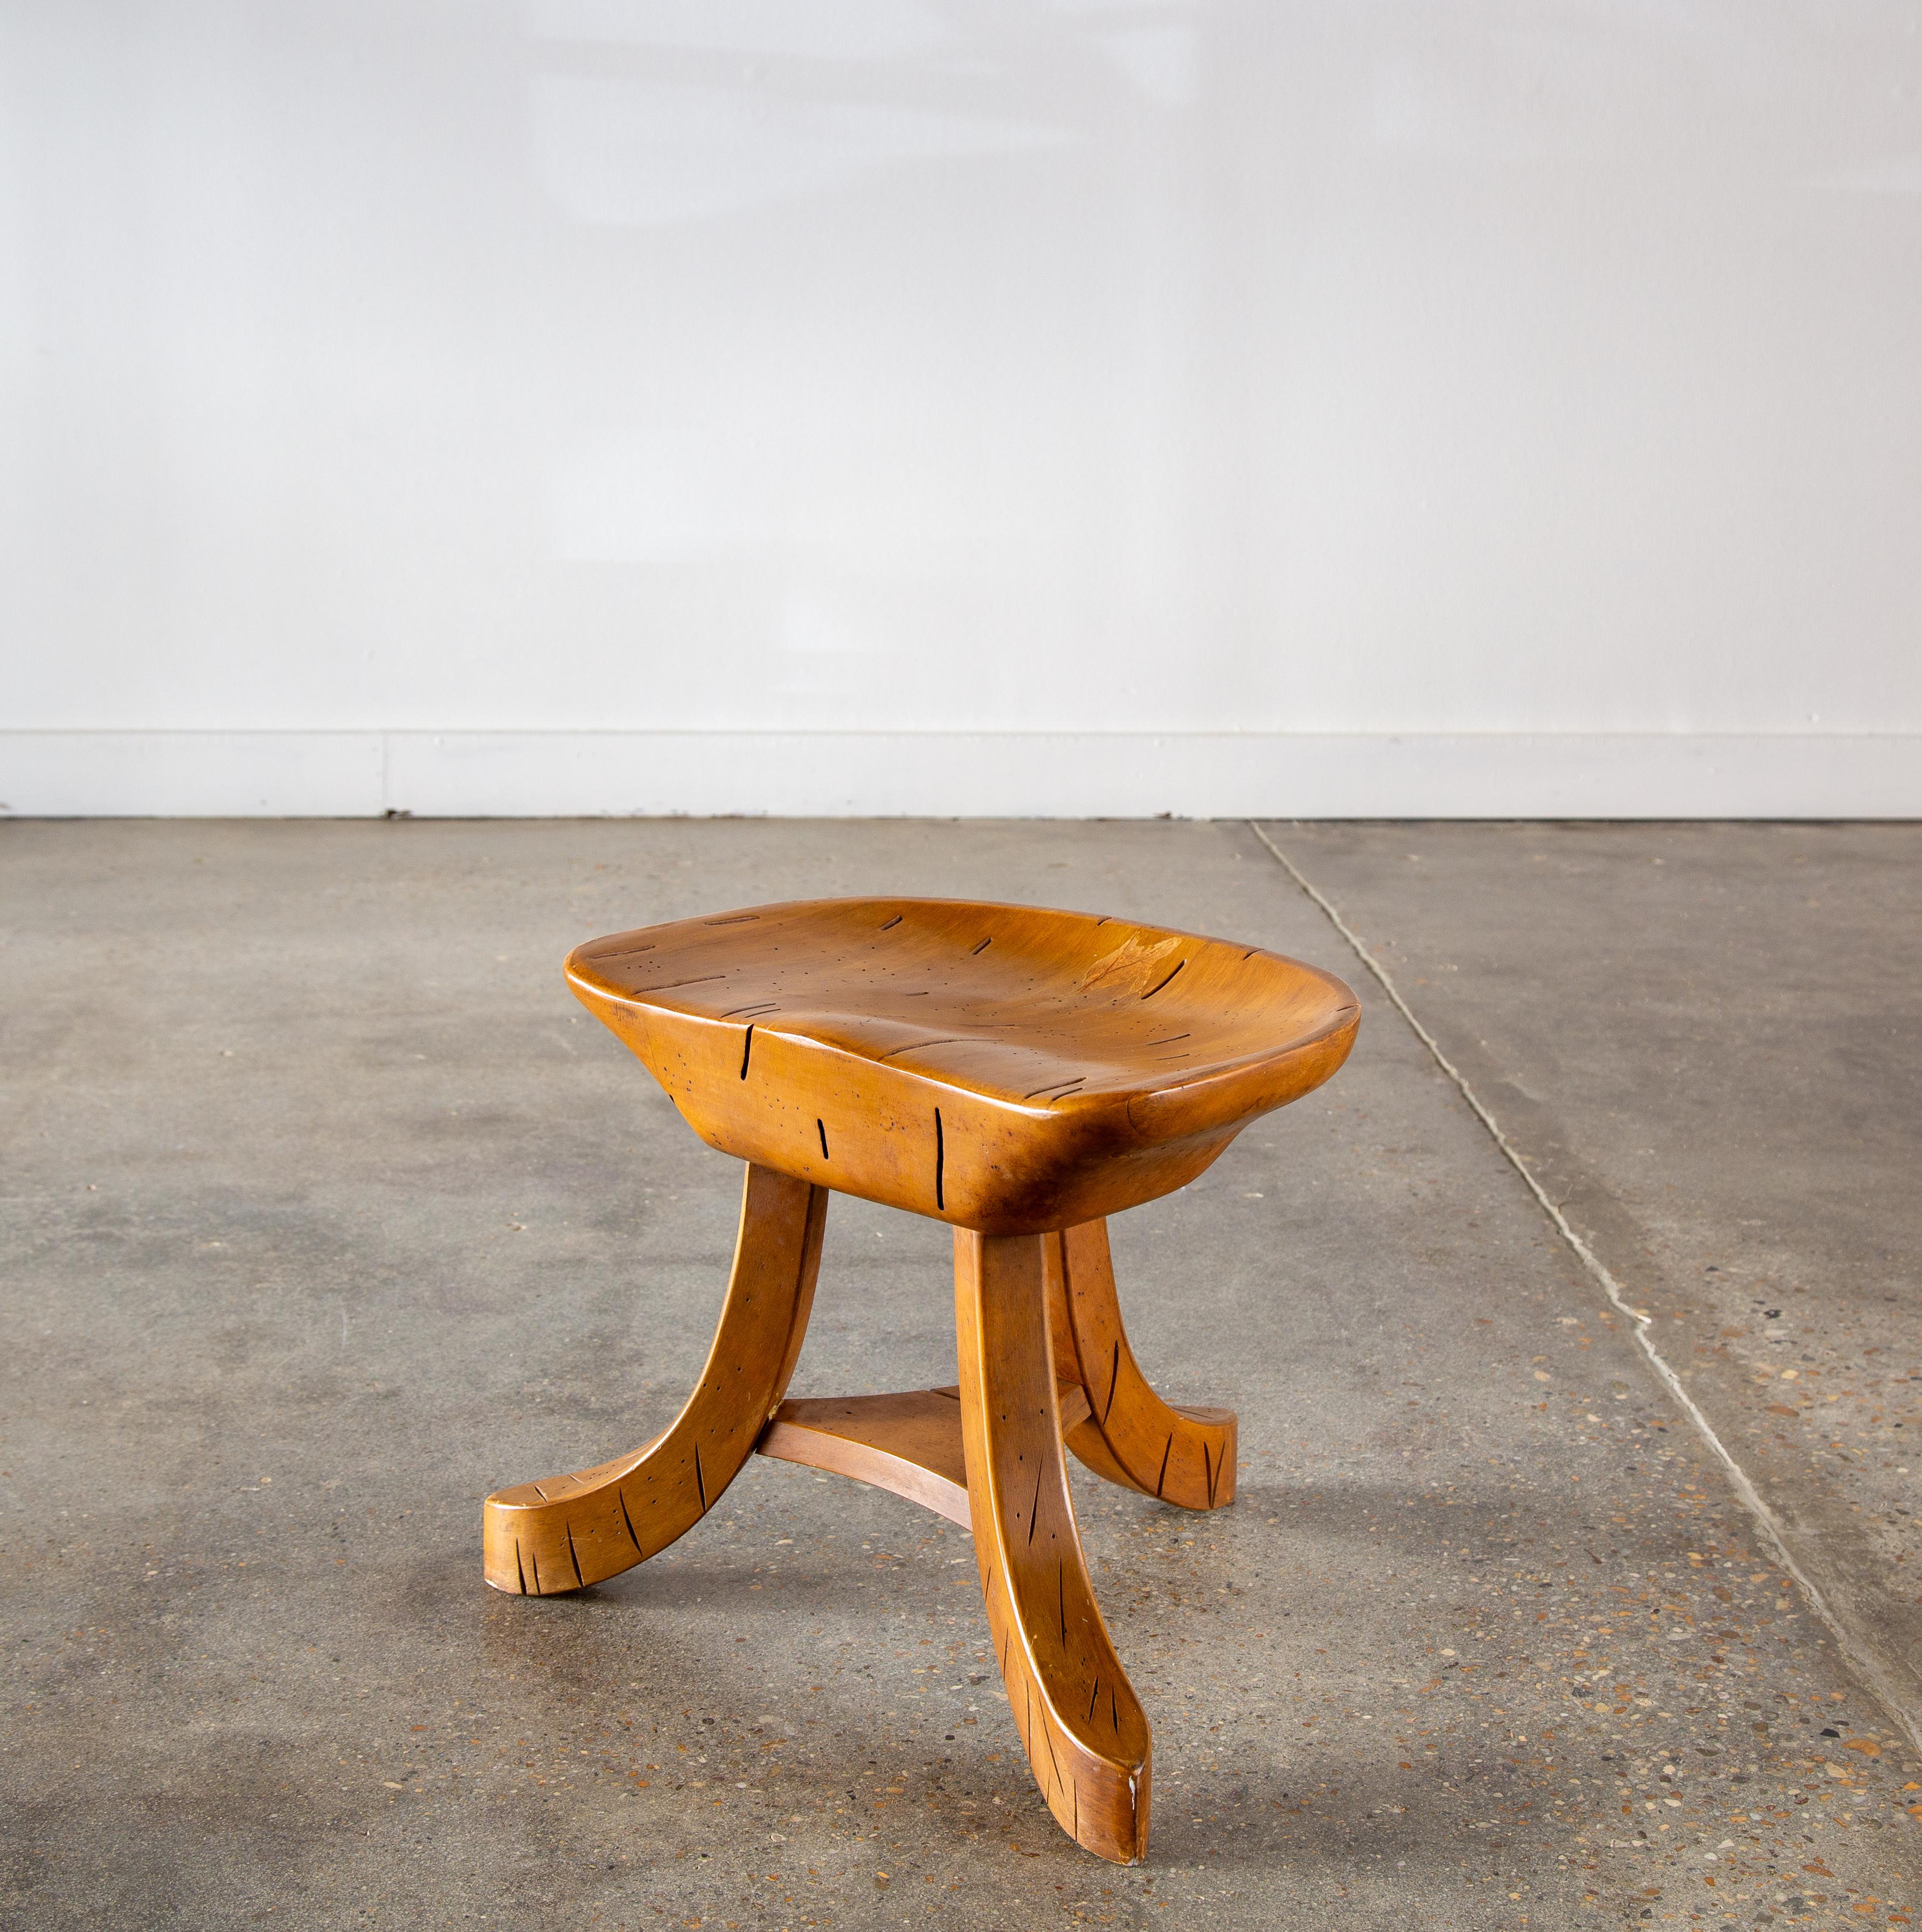 Solid ambrosia maple featuring beetle and worm holes and tunnels throughout.  This stool with a thick hand carved seat elevated by three splayed legs features a brass plaque on the bottom which reads Madison Avenue Milking stool XMAS 1966. Similar